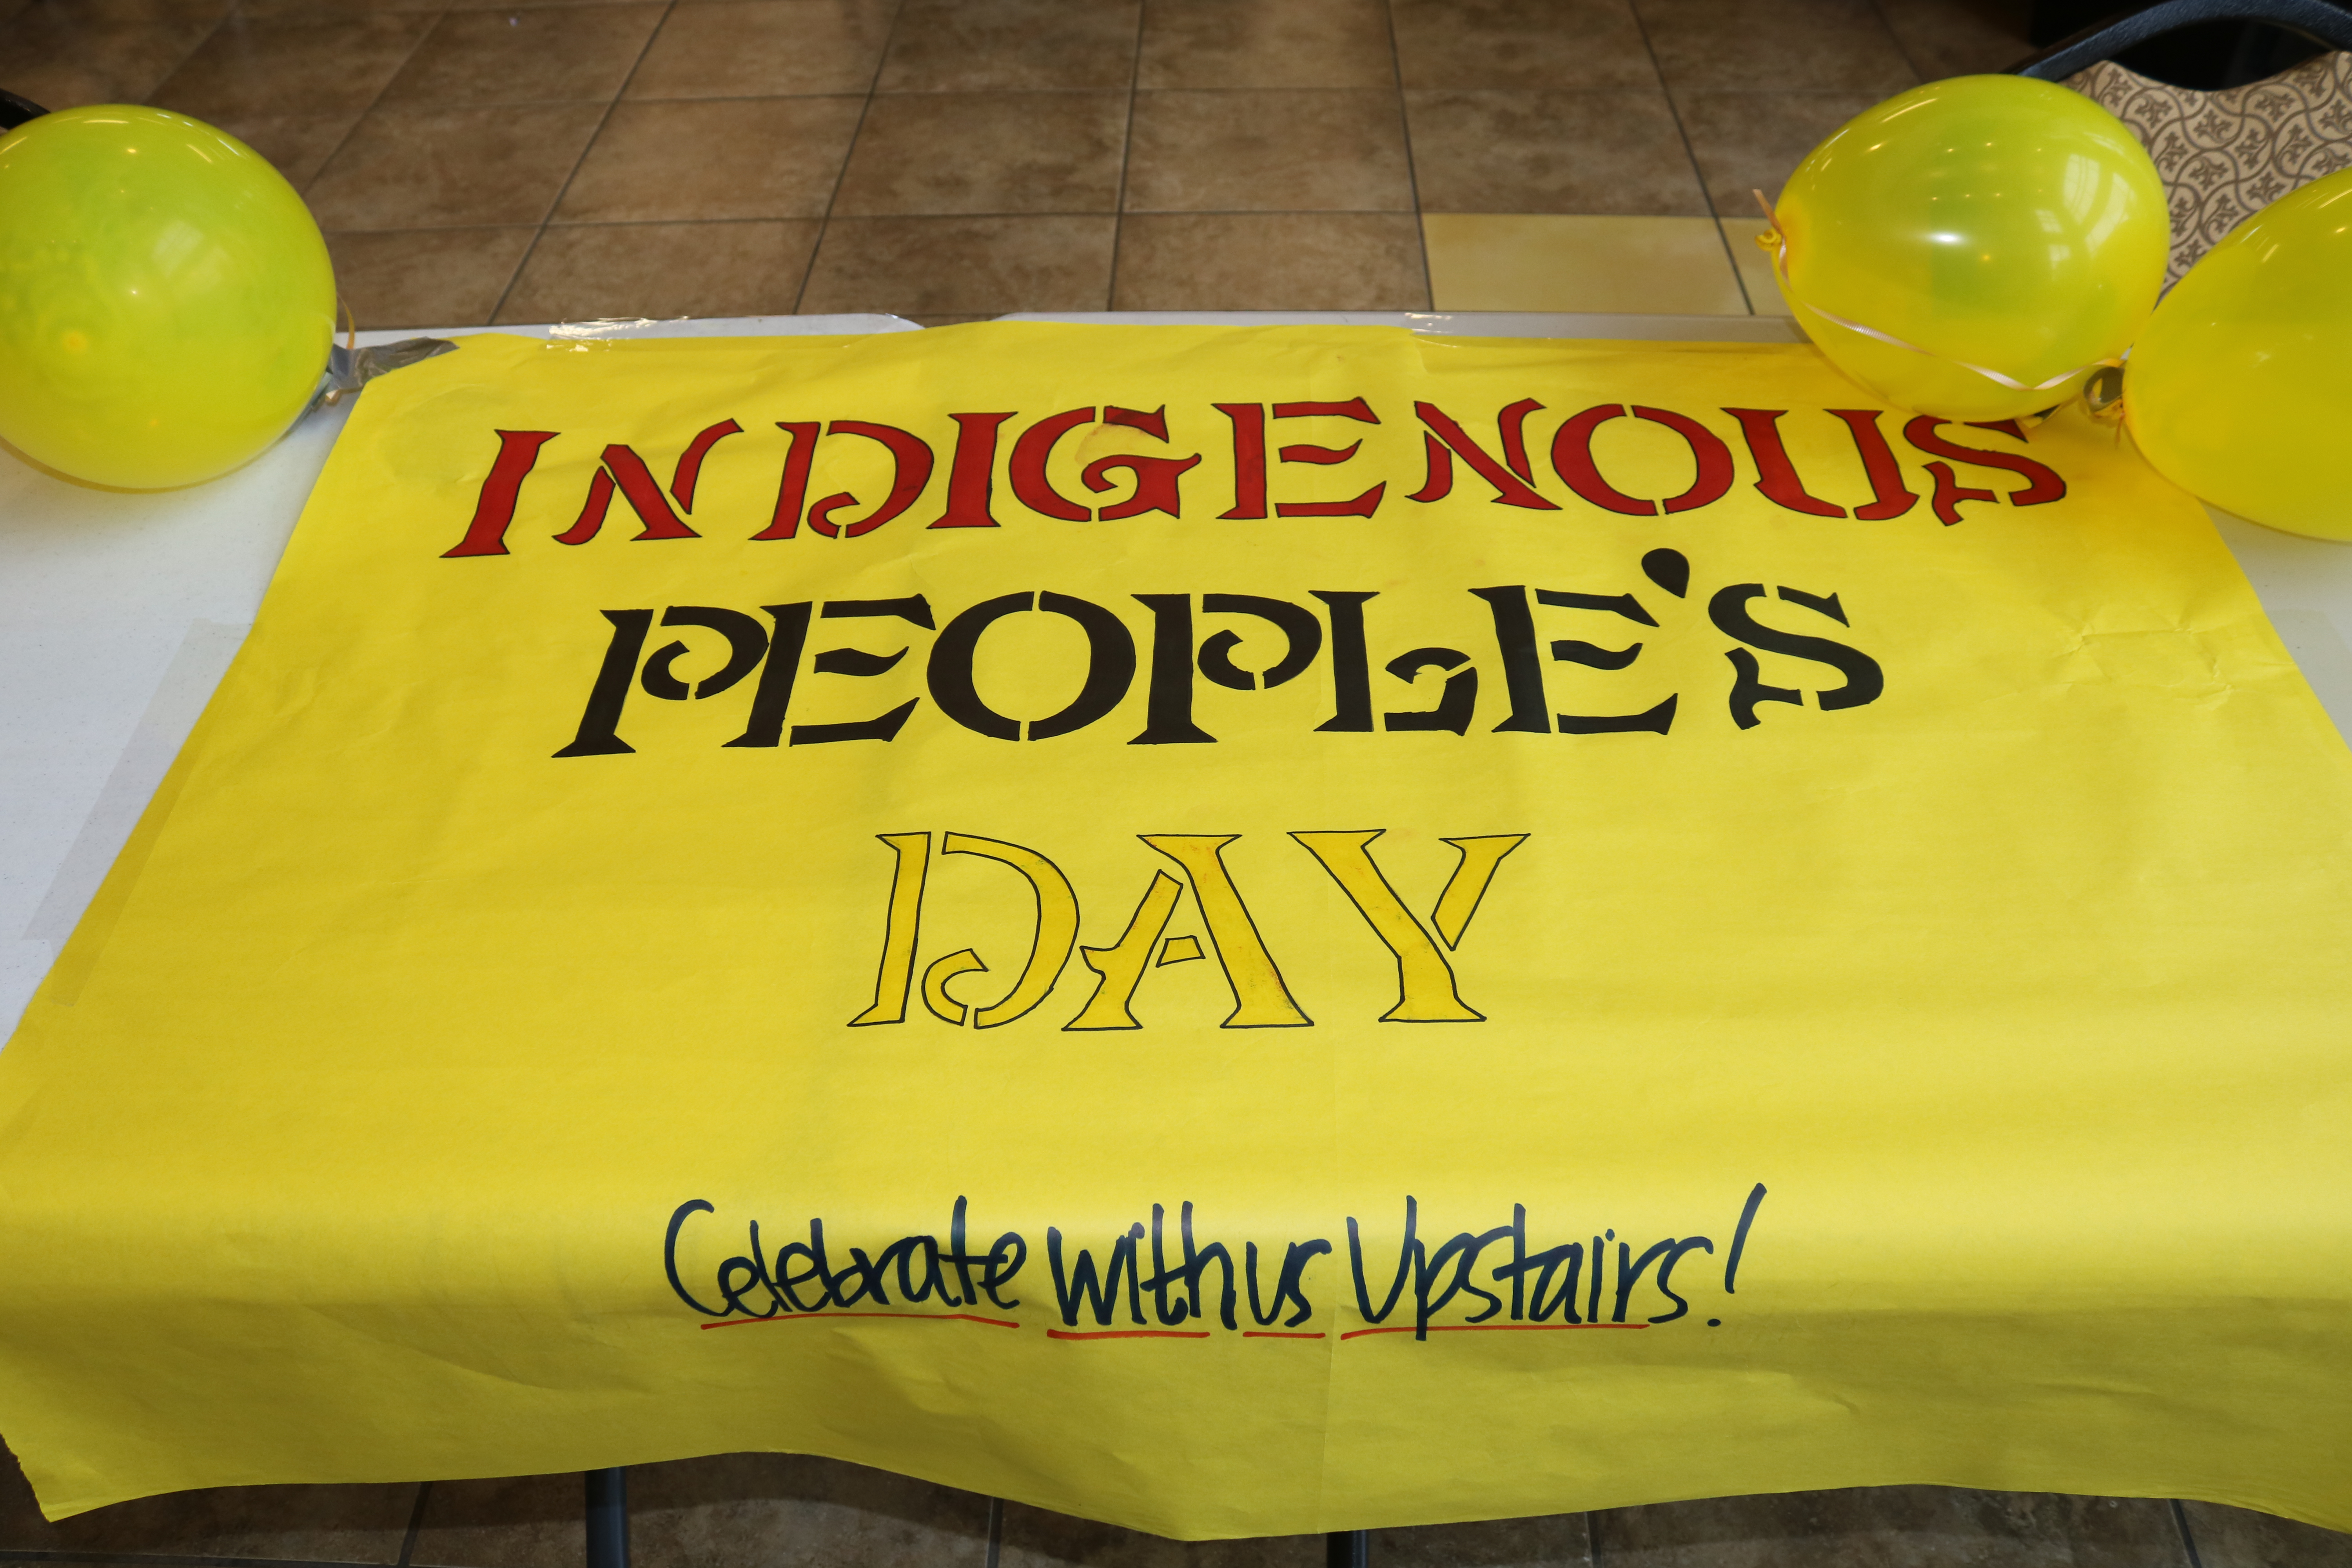 Native American Student Association: Indigenous Peoples’ Day